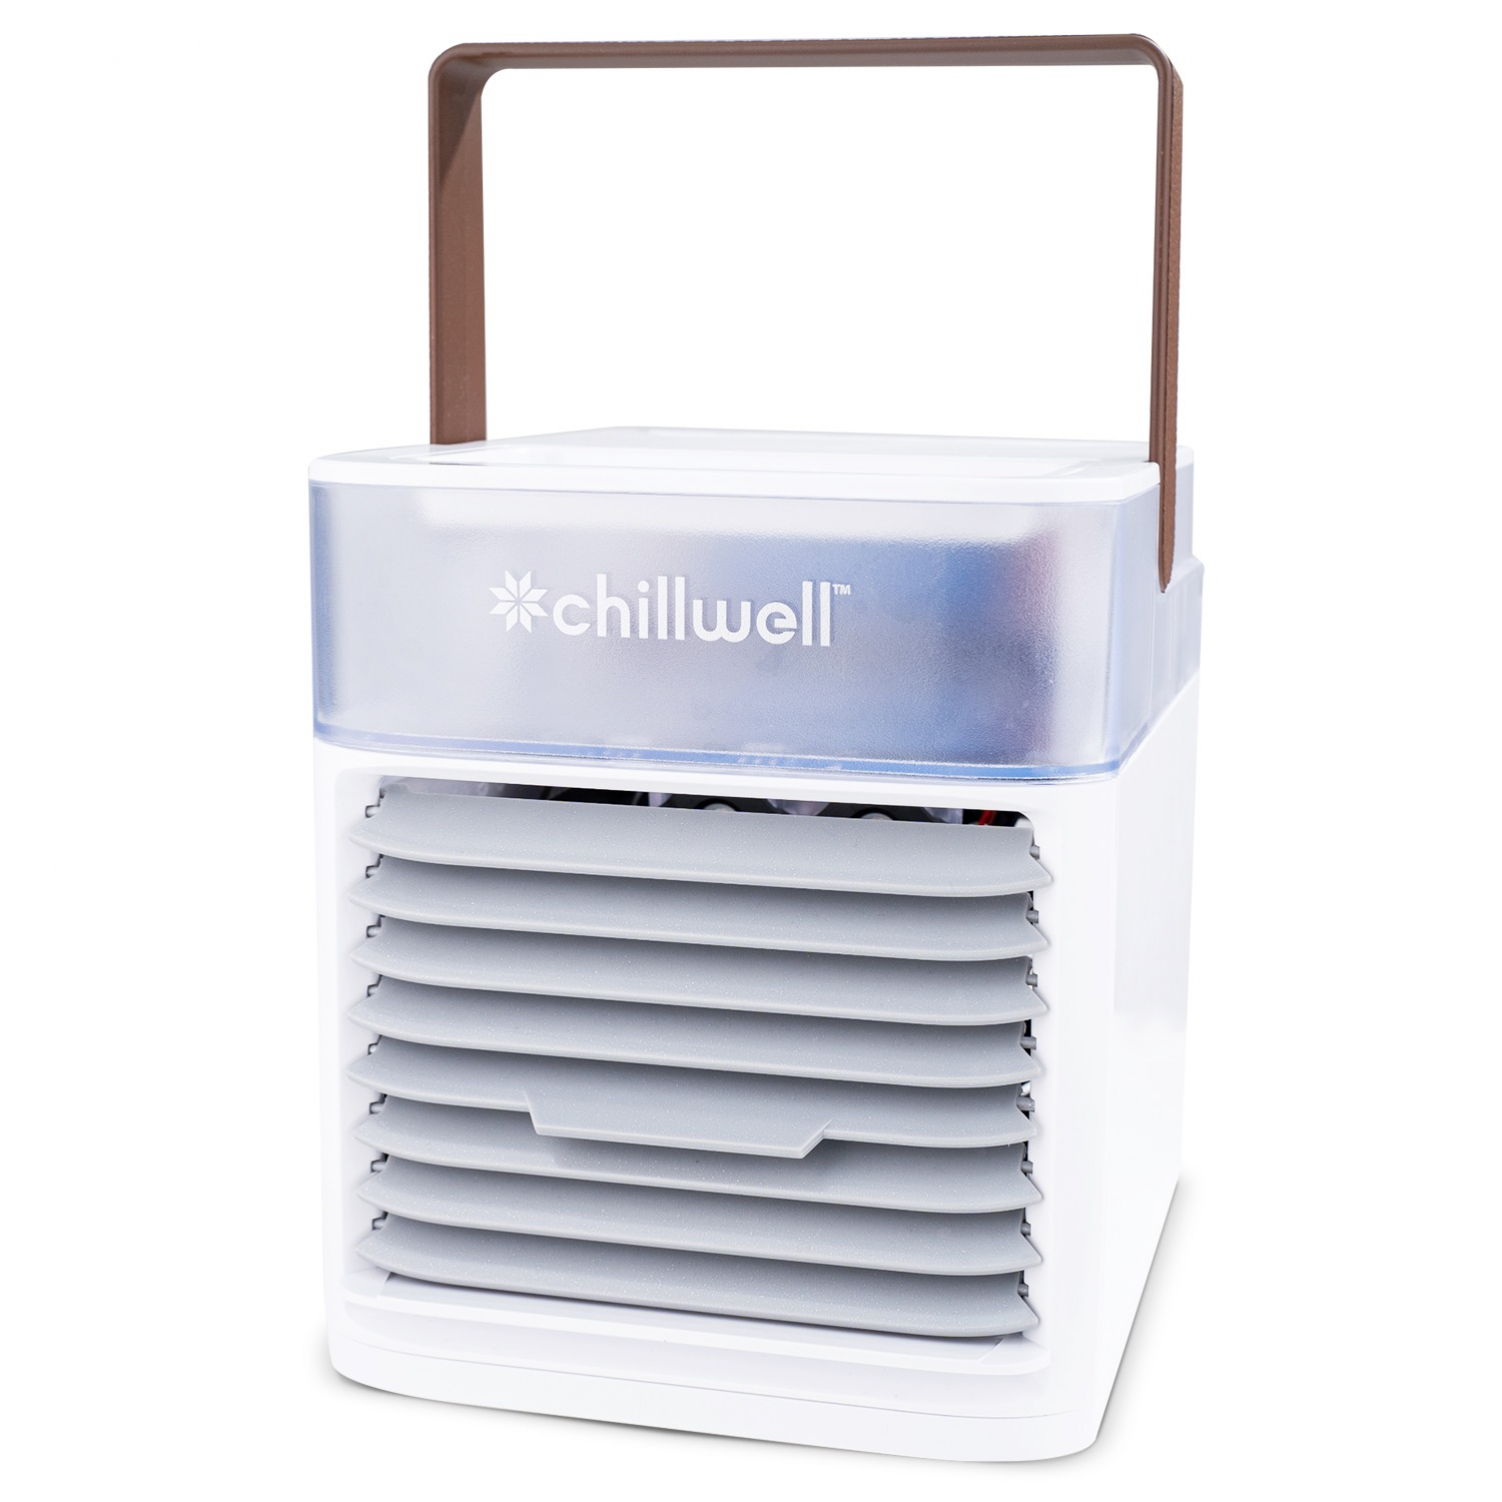 Chillwell Ac Wearable Personal Air Cooler